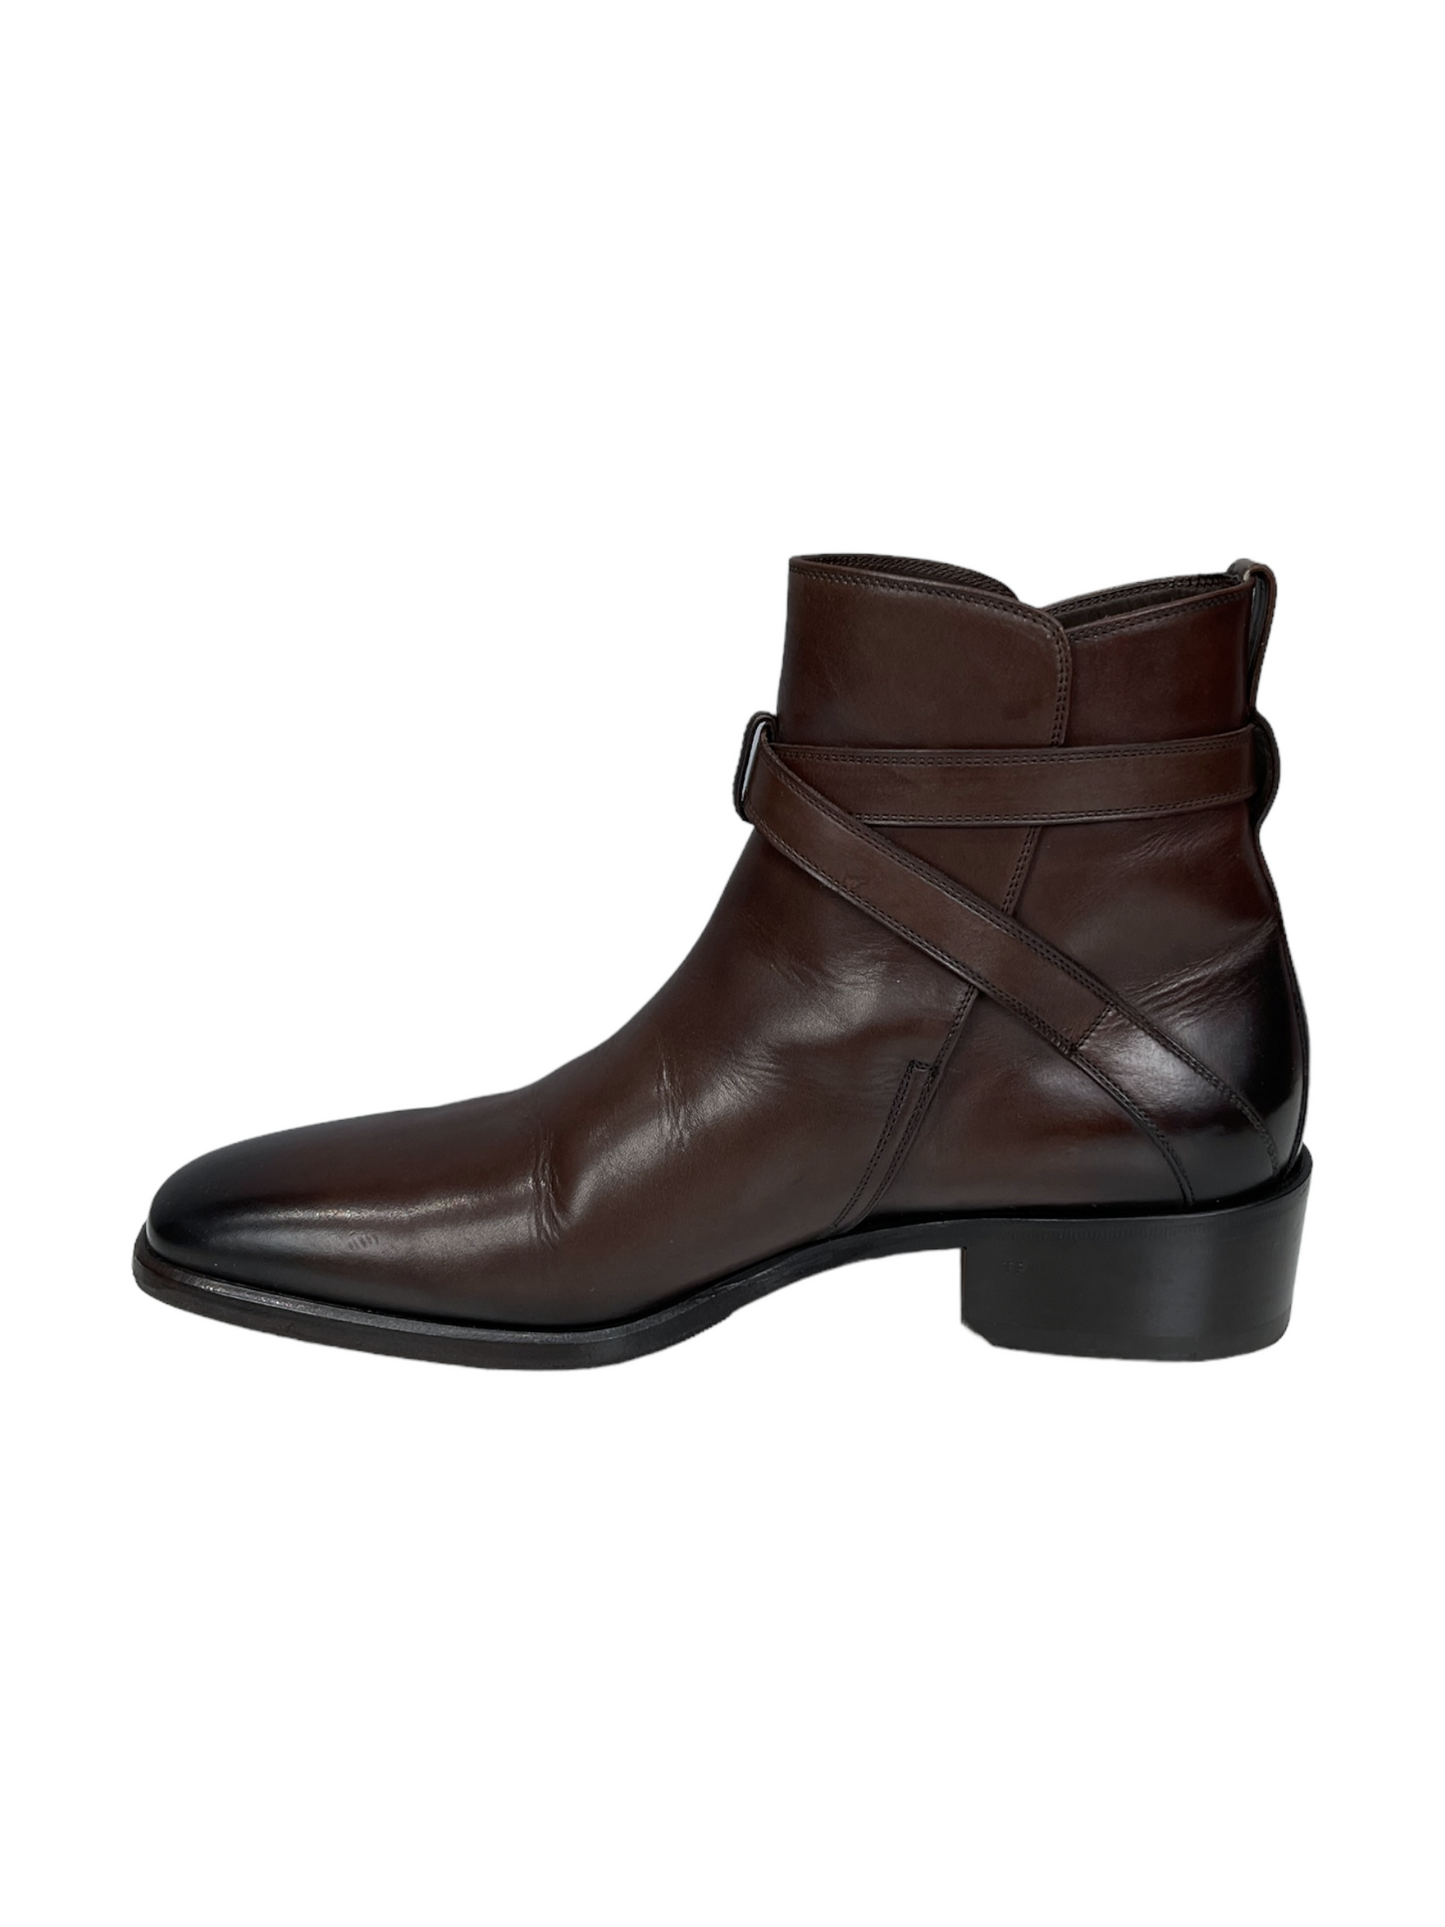 Tom Ford Brown Leather Jodhpur Boot 8 - Genuine Design Luxury Consignment Calgary, Alberta, Canada New and Pre-Owned Clothing, Shoes, Accessories.